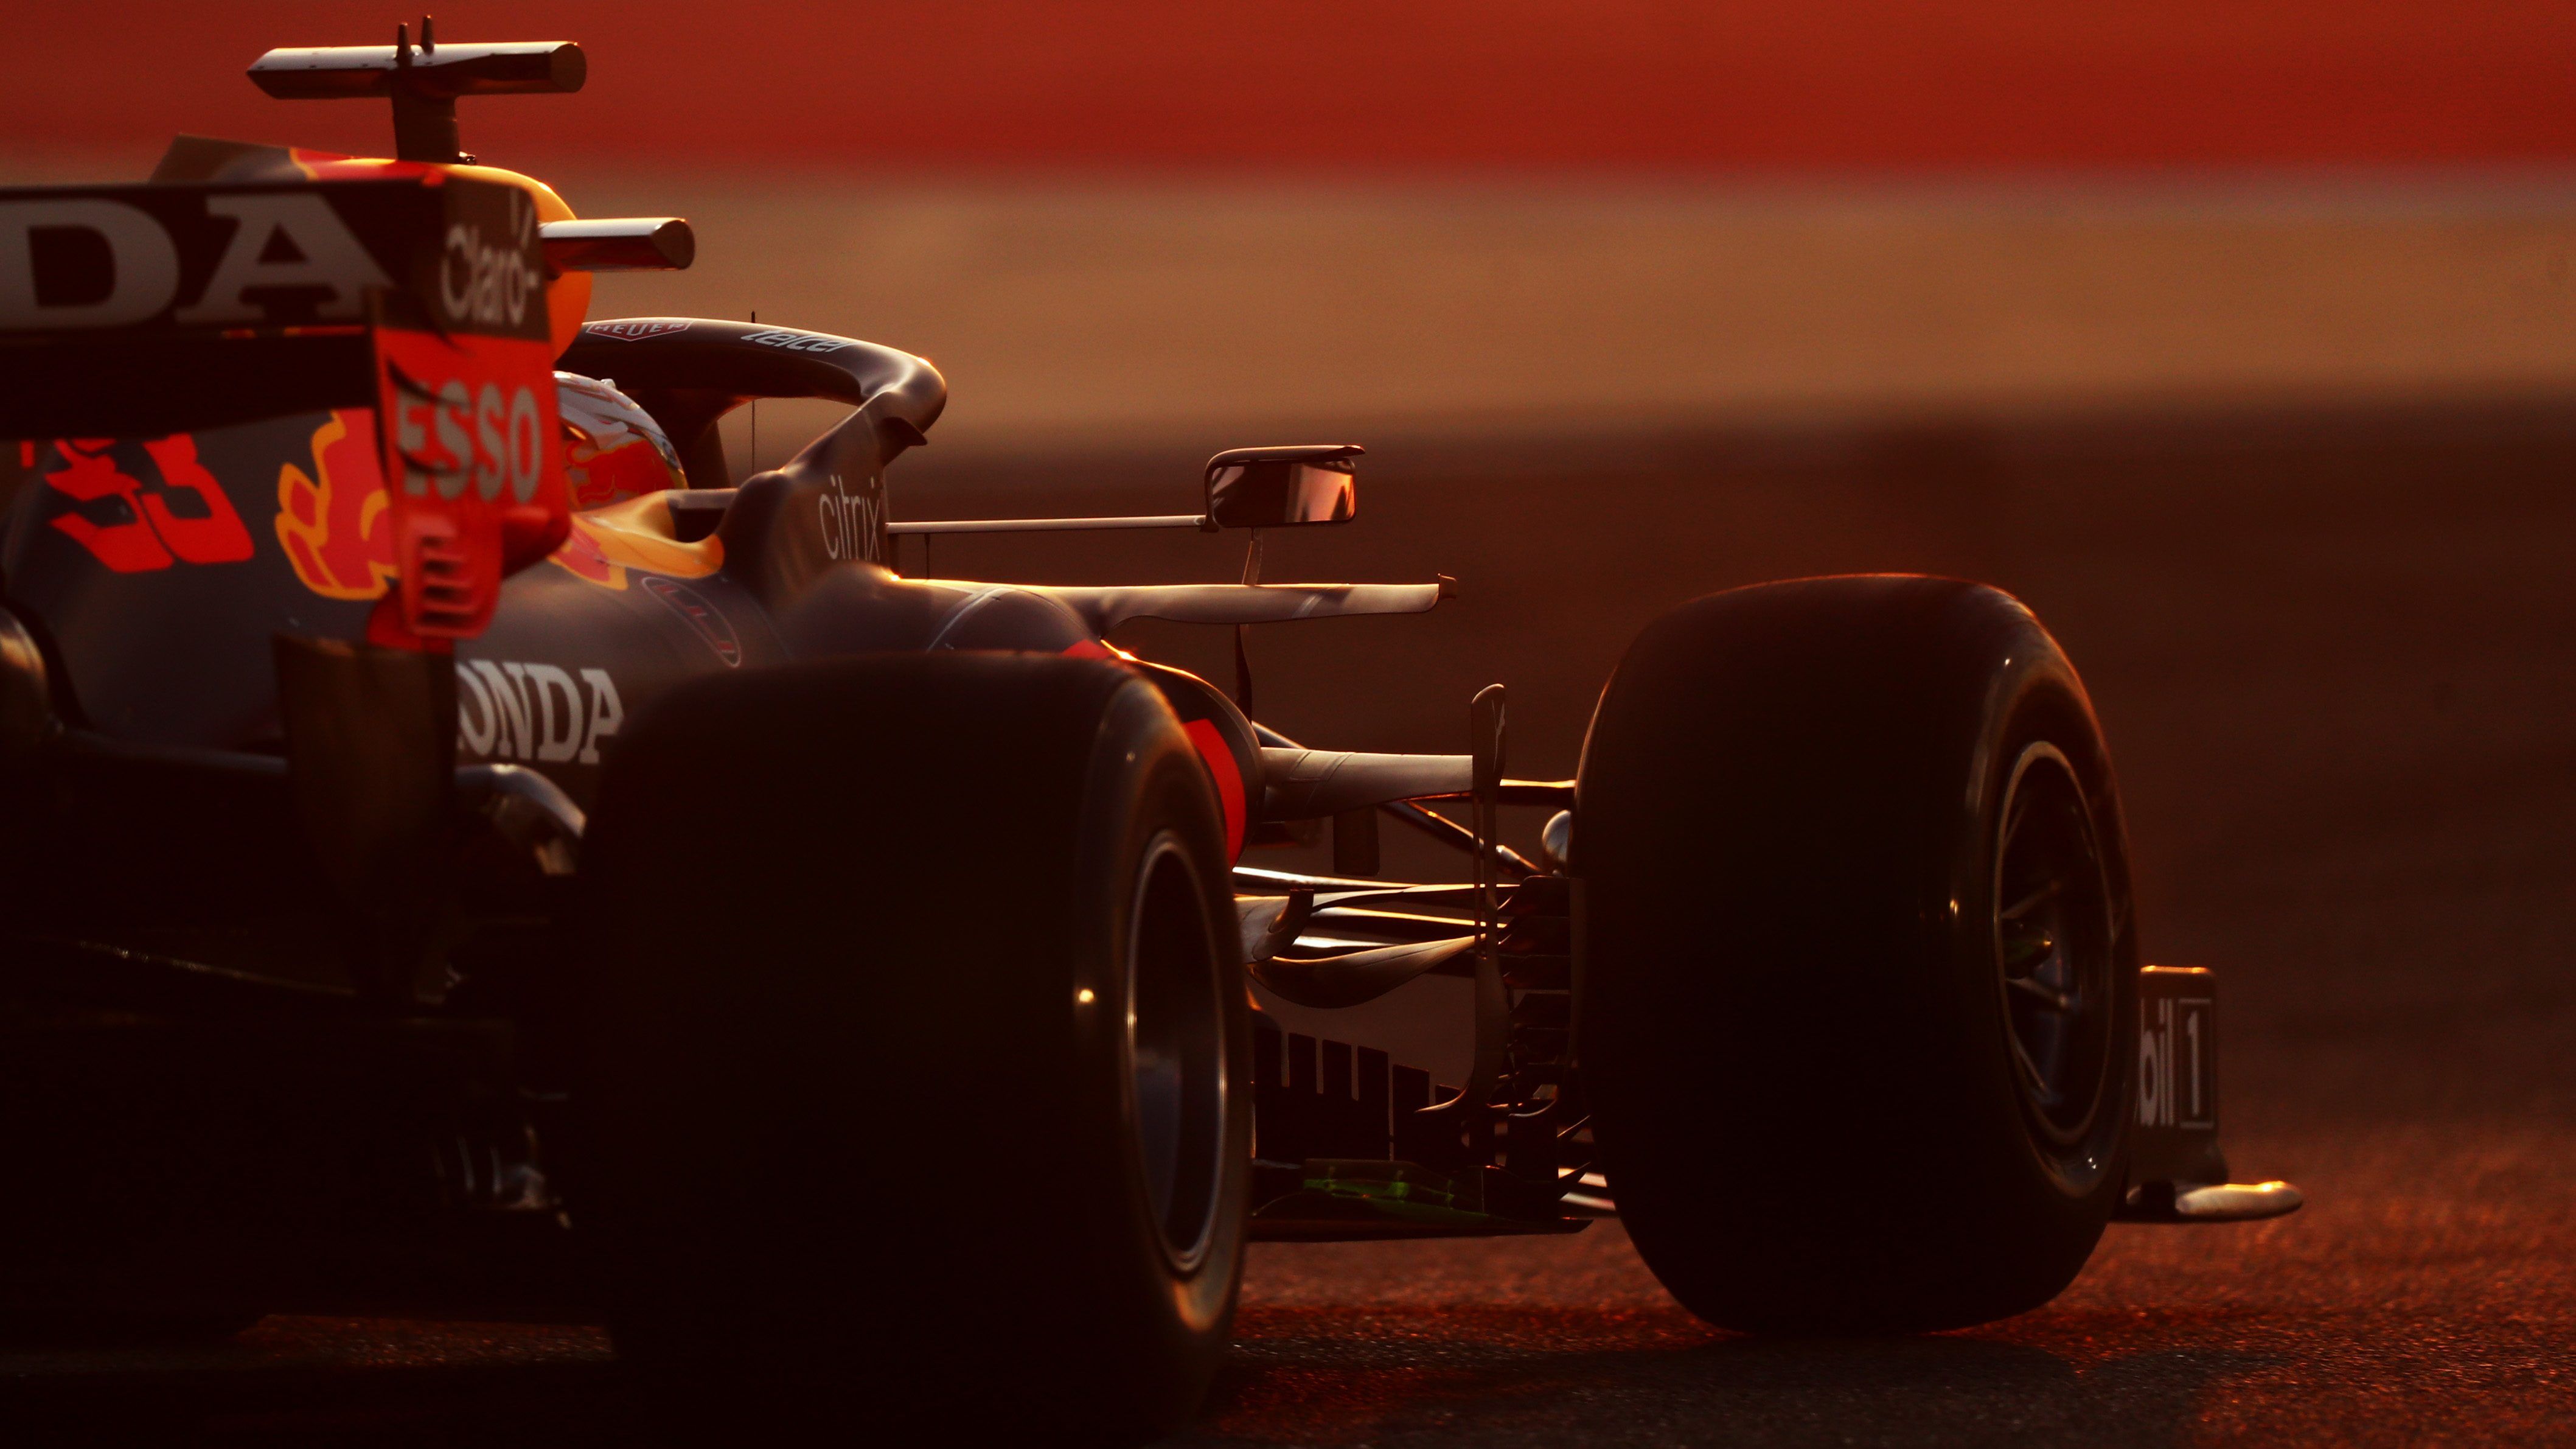 Max Verstappen, Sergio Perez looking strong for Red Bull in F1 testing